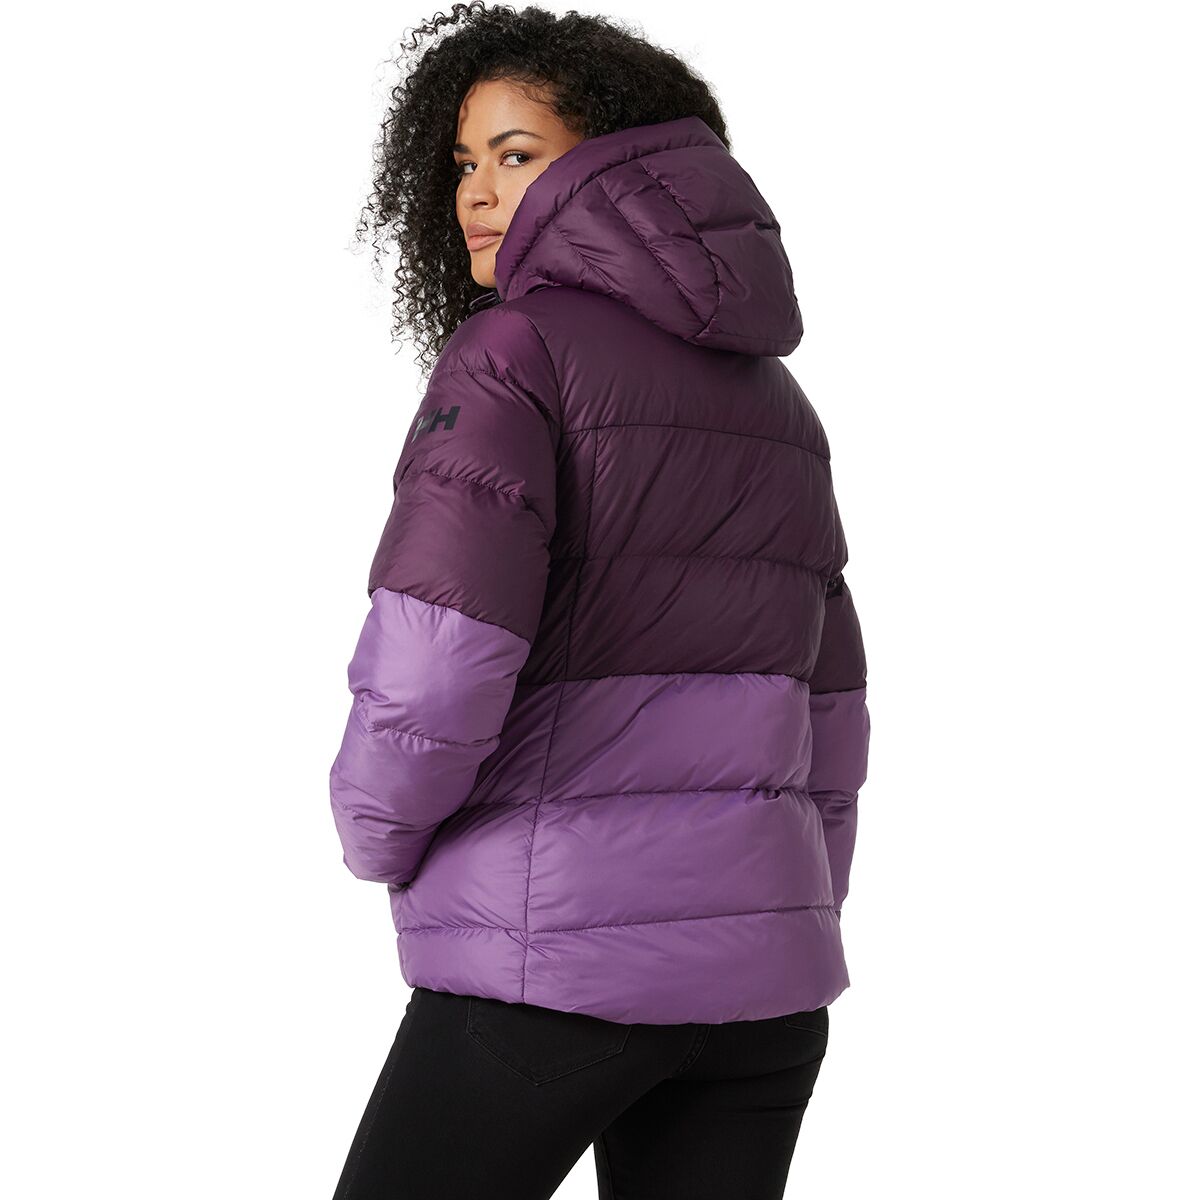 Helly Hansen Active Puffy Jacket   Women's   Clothing